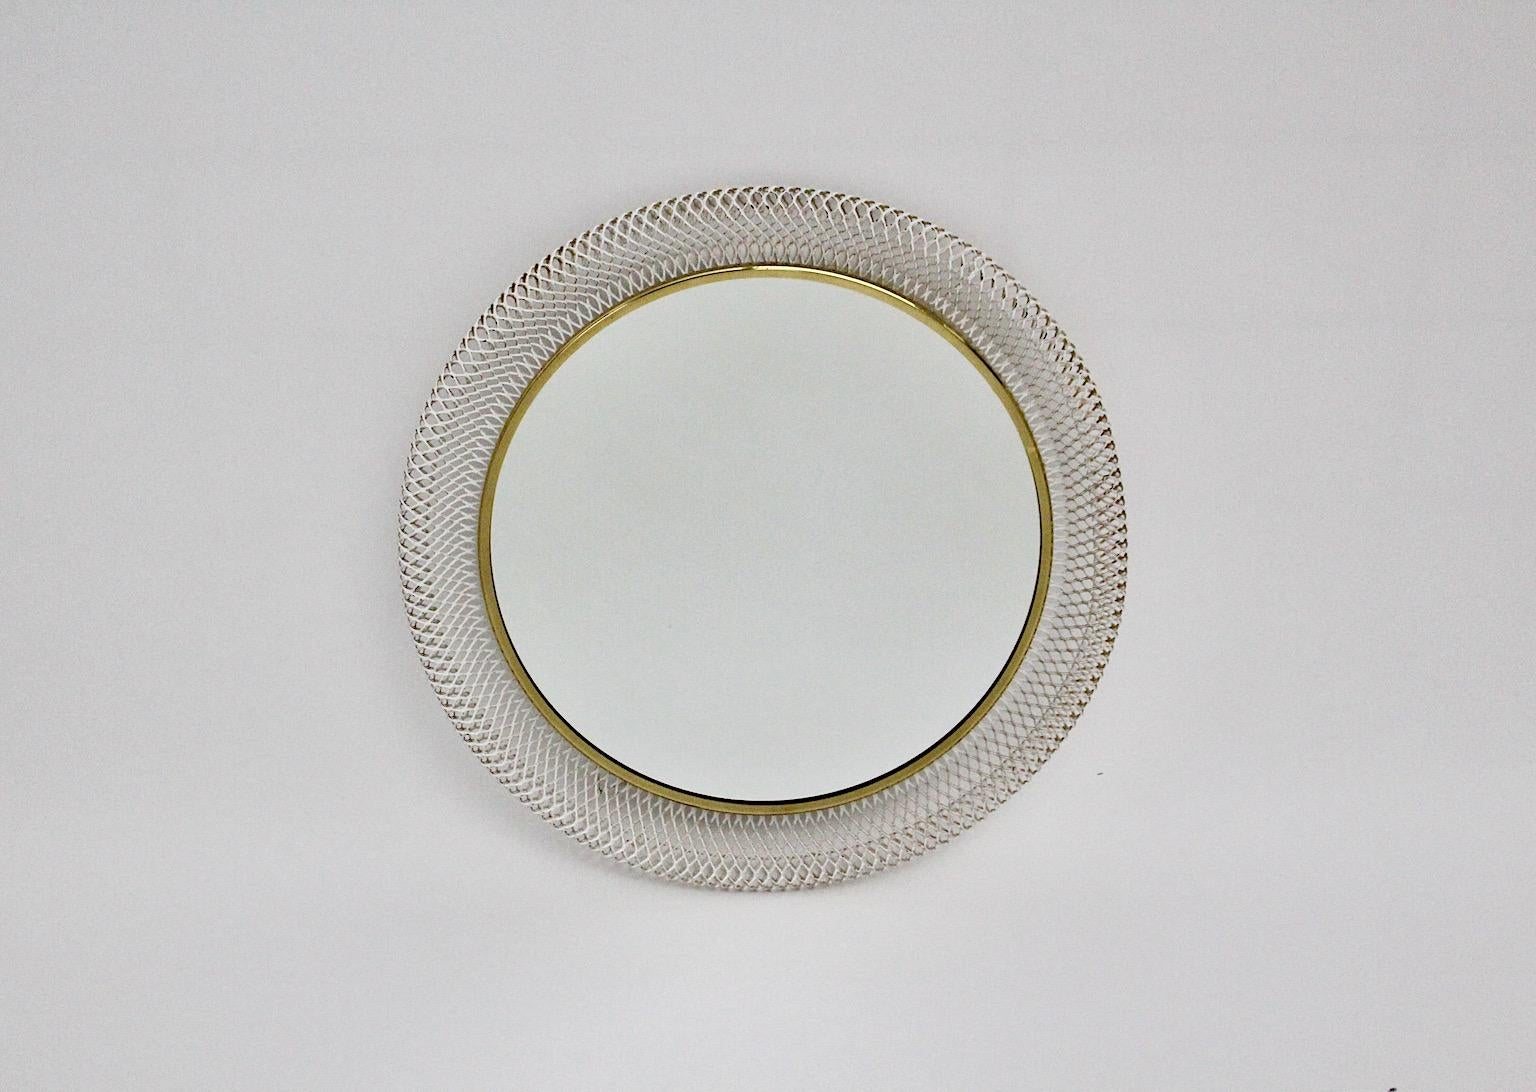 Mid Century Modern vintage circular wall mirror from white metal and brass mesh
Münchener Werkstätten 1960s Germany.
An elegant and stunning white metal and brass frame with mirror glass circular like with one mounting loop at the backside.
very